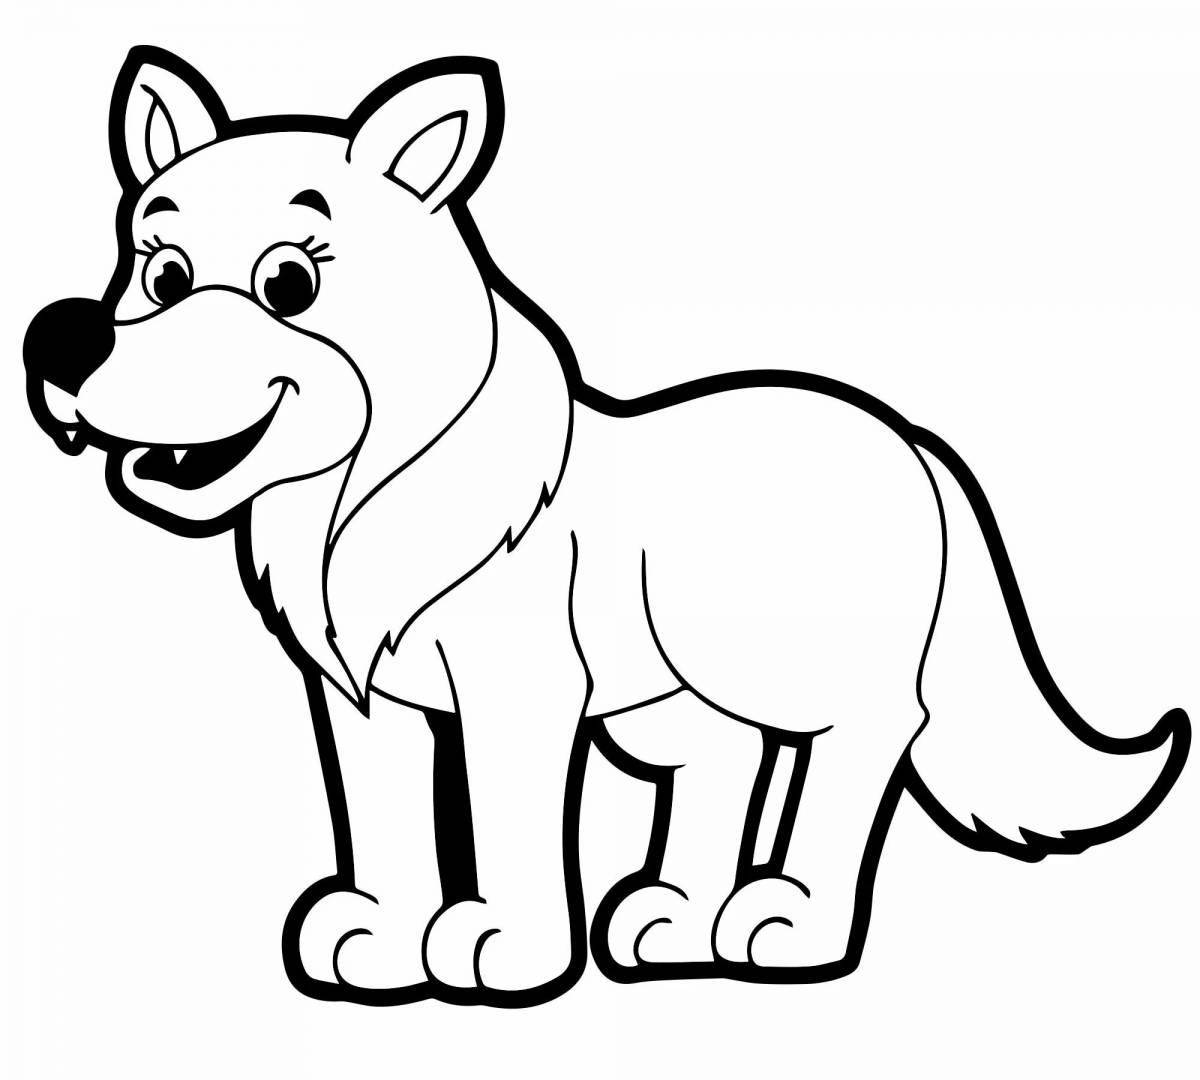 Inspirational wolf coloring book for kids